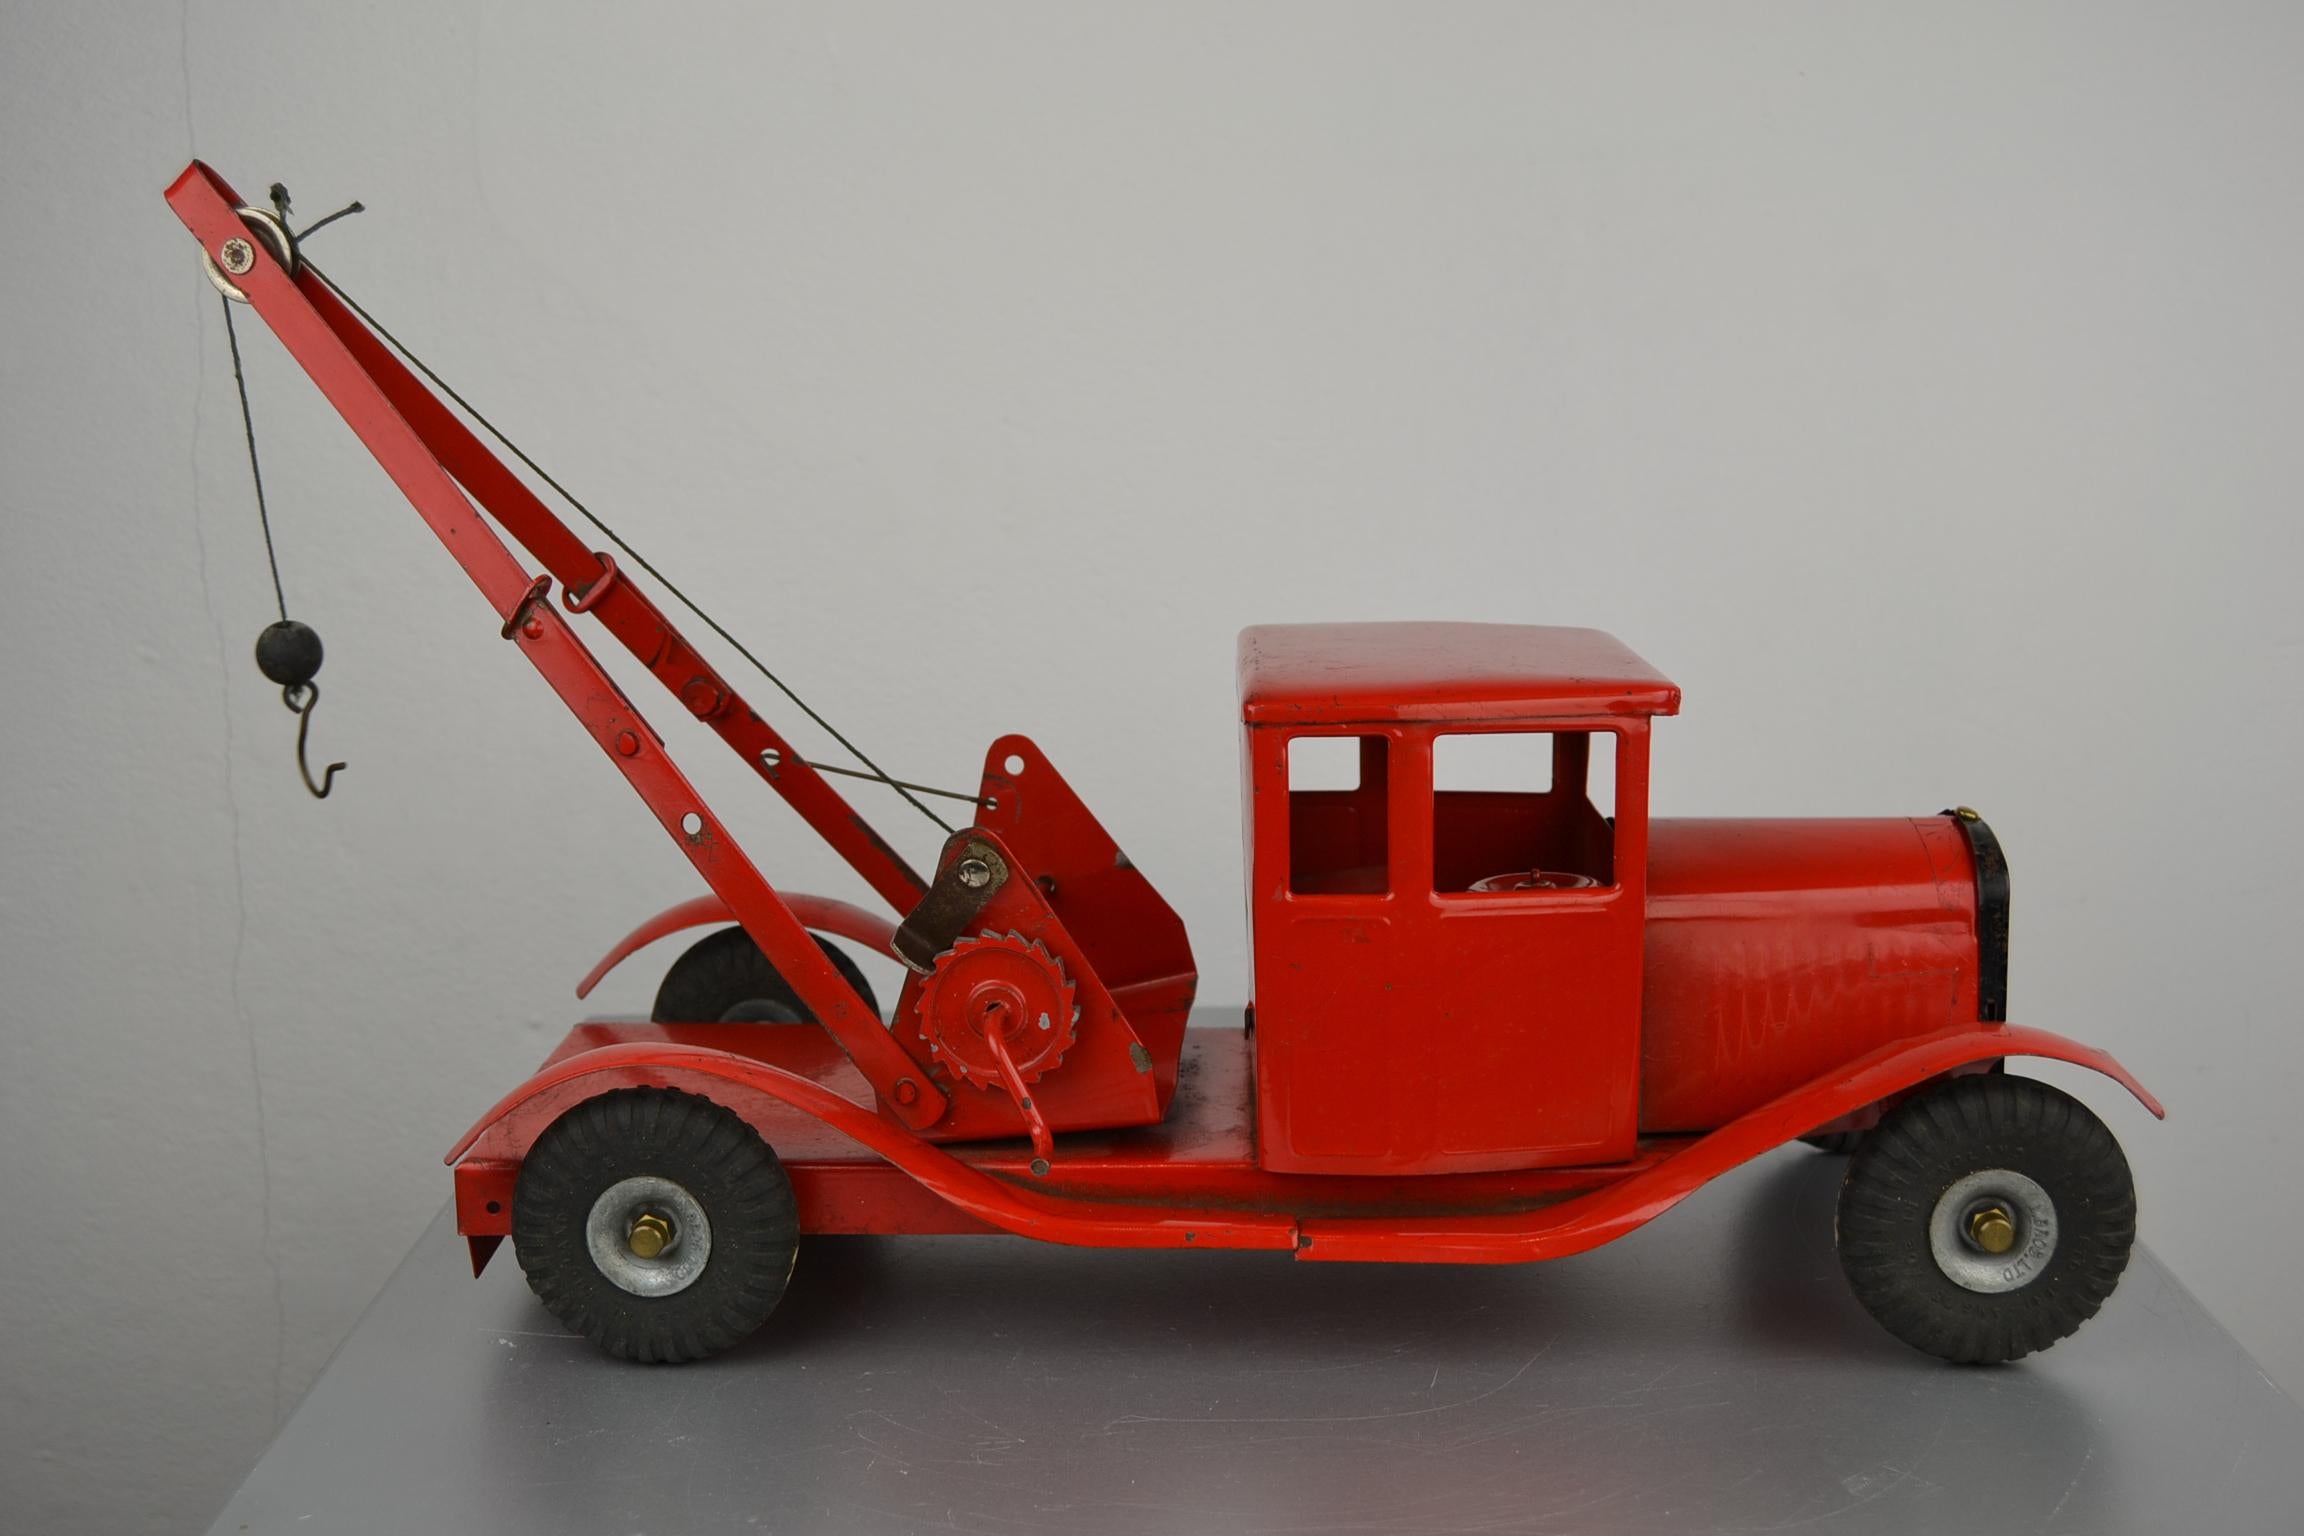 Large vintage pressed steel Bedford lorry wrecker toy truck.
Made by Tri-Ang / Triang between 1948-1957 in England.
The metal Truck has a good straight Body with original red paint, boom ( has some inflection see pics), string and hook. The rubber